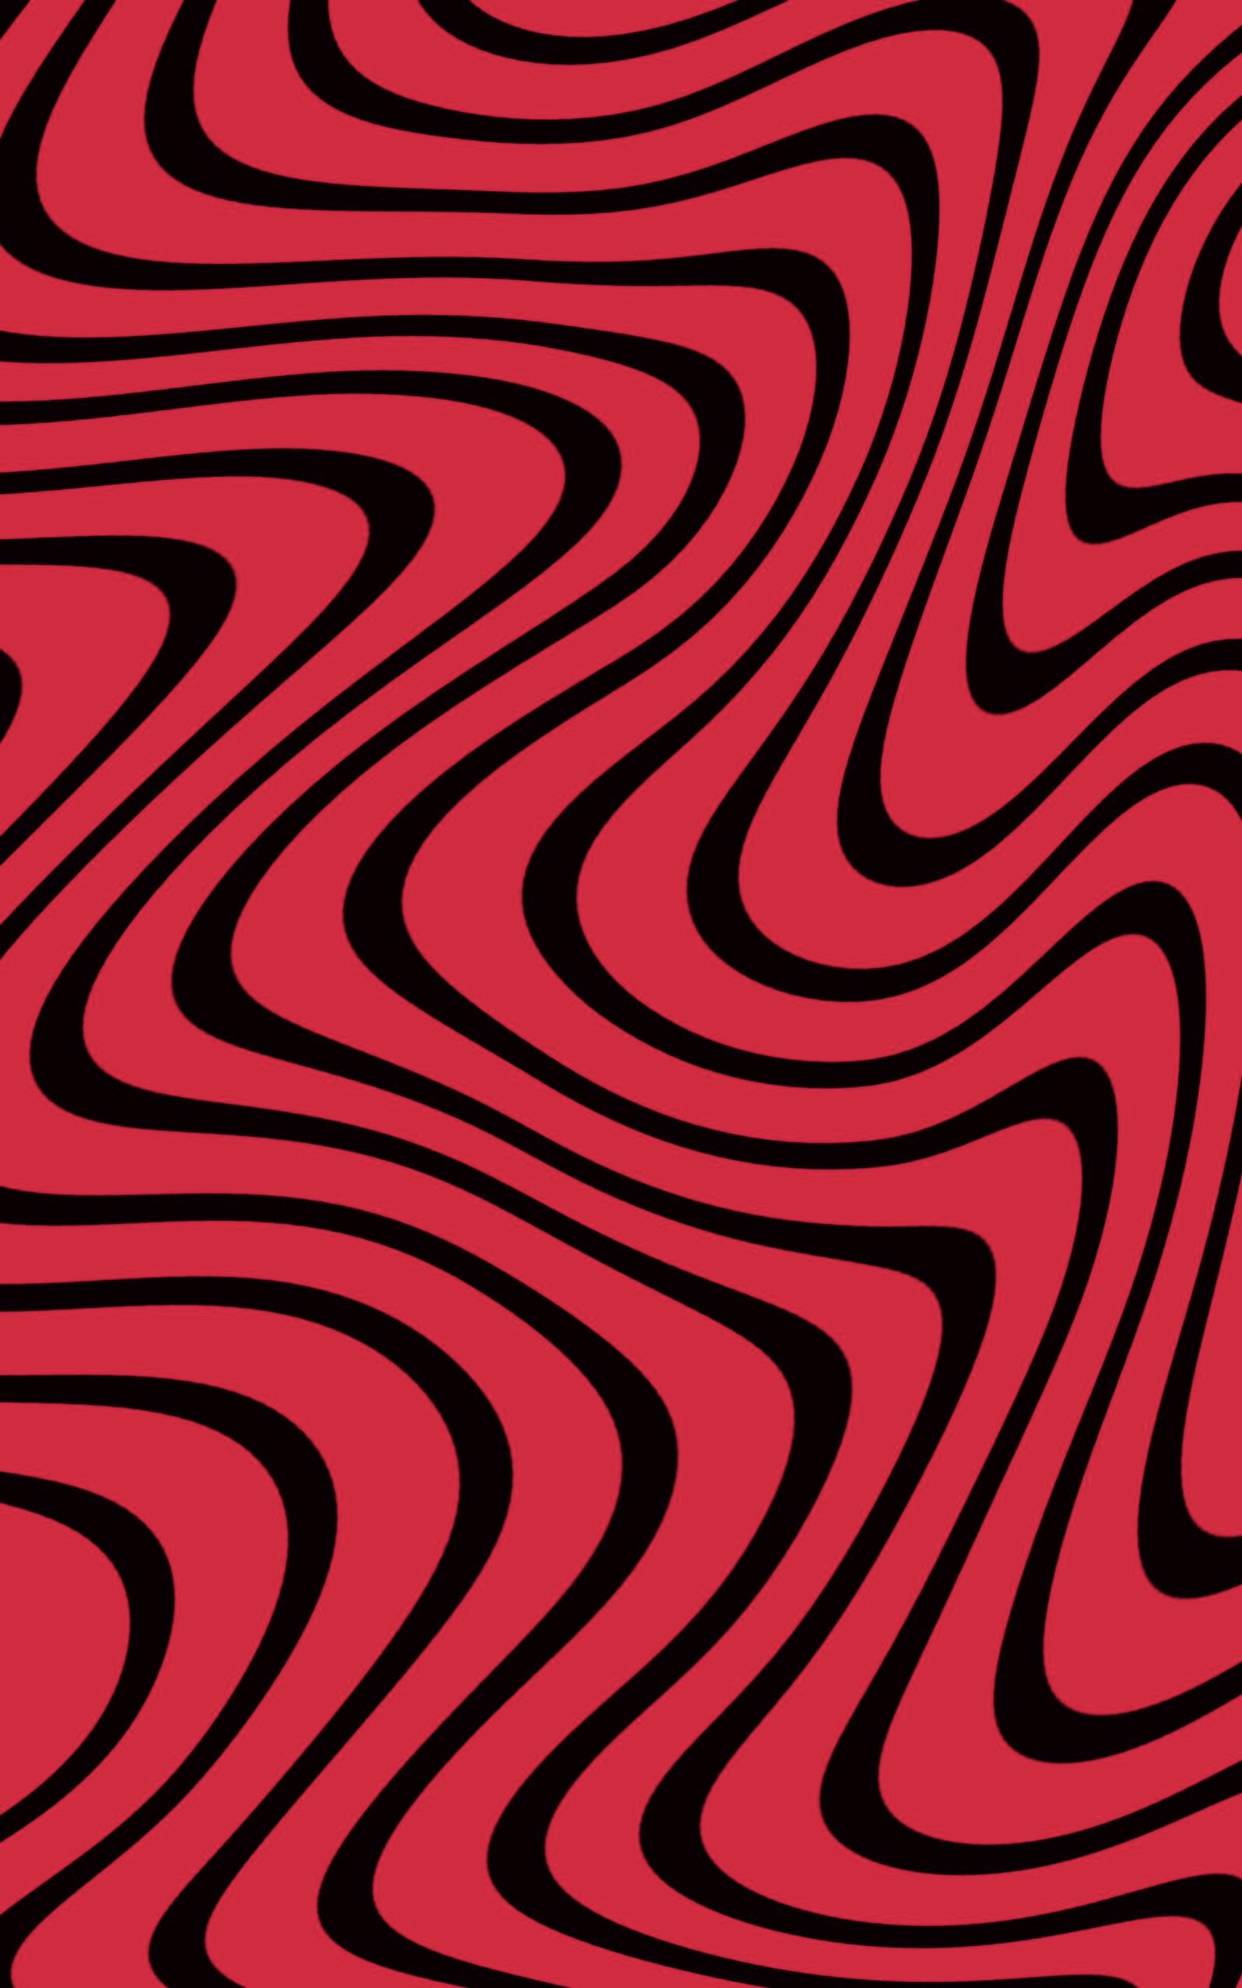 For anyone who wanted the pewdiepie wallpaper